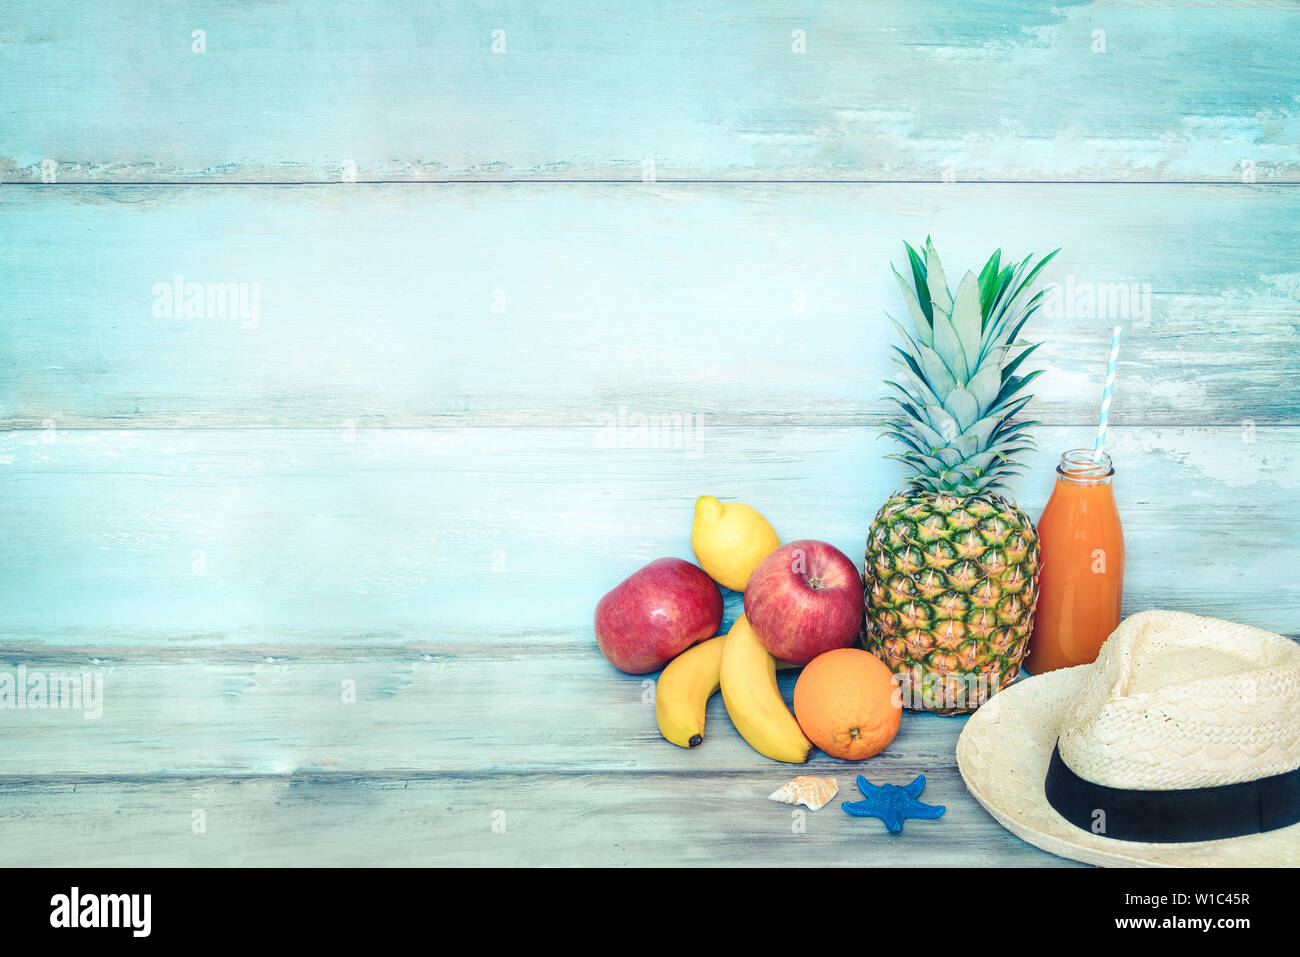 Summer concept stillife - a pile of fresh fruits, straw hat and a bottle of multivitamin juice in front of a blue rustic wooden background. Stock Photo